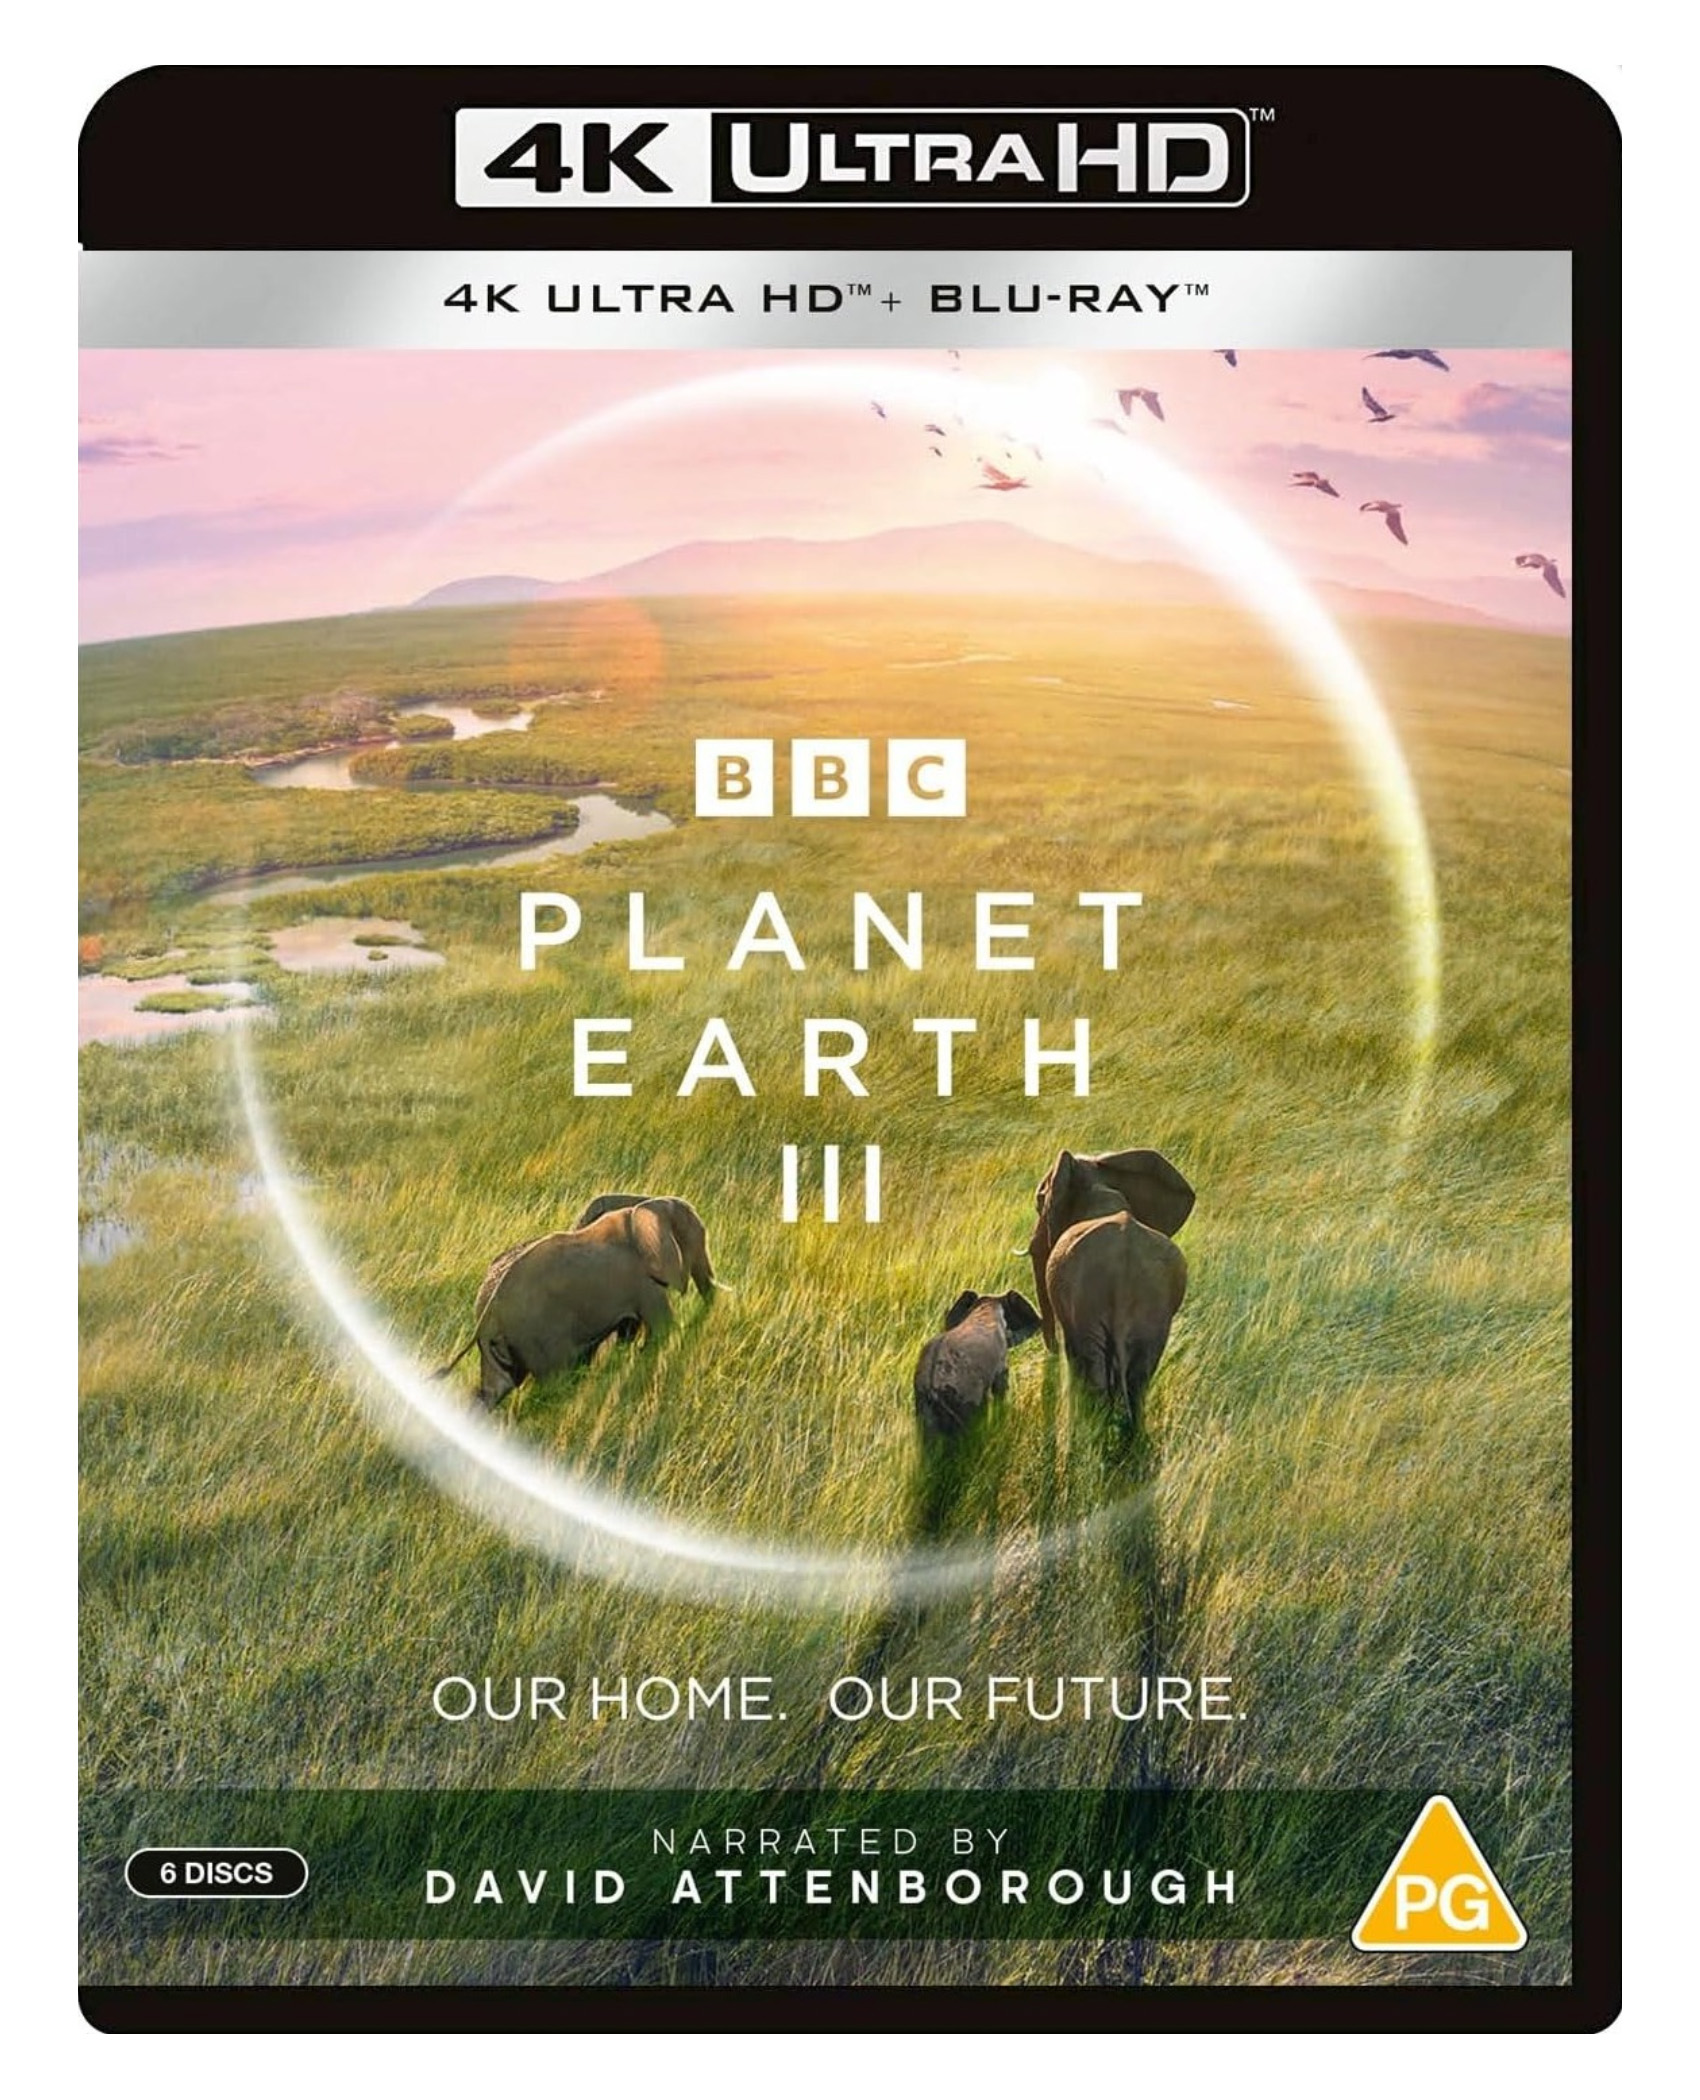 Planet Earth III 4K BD cover